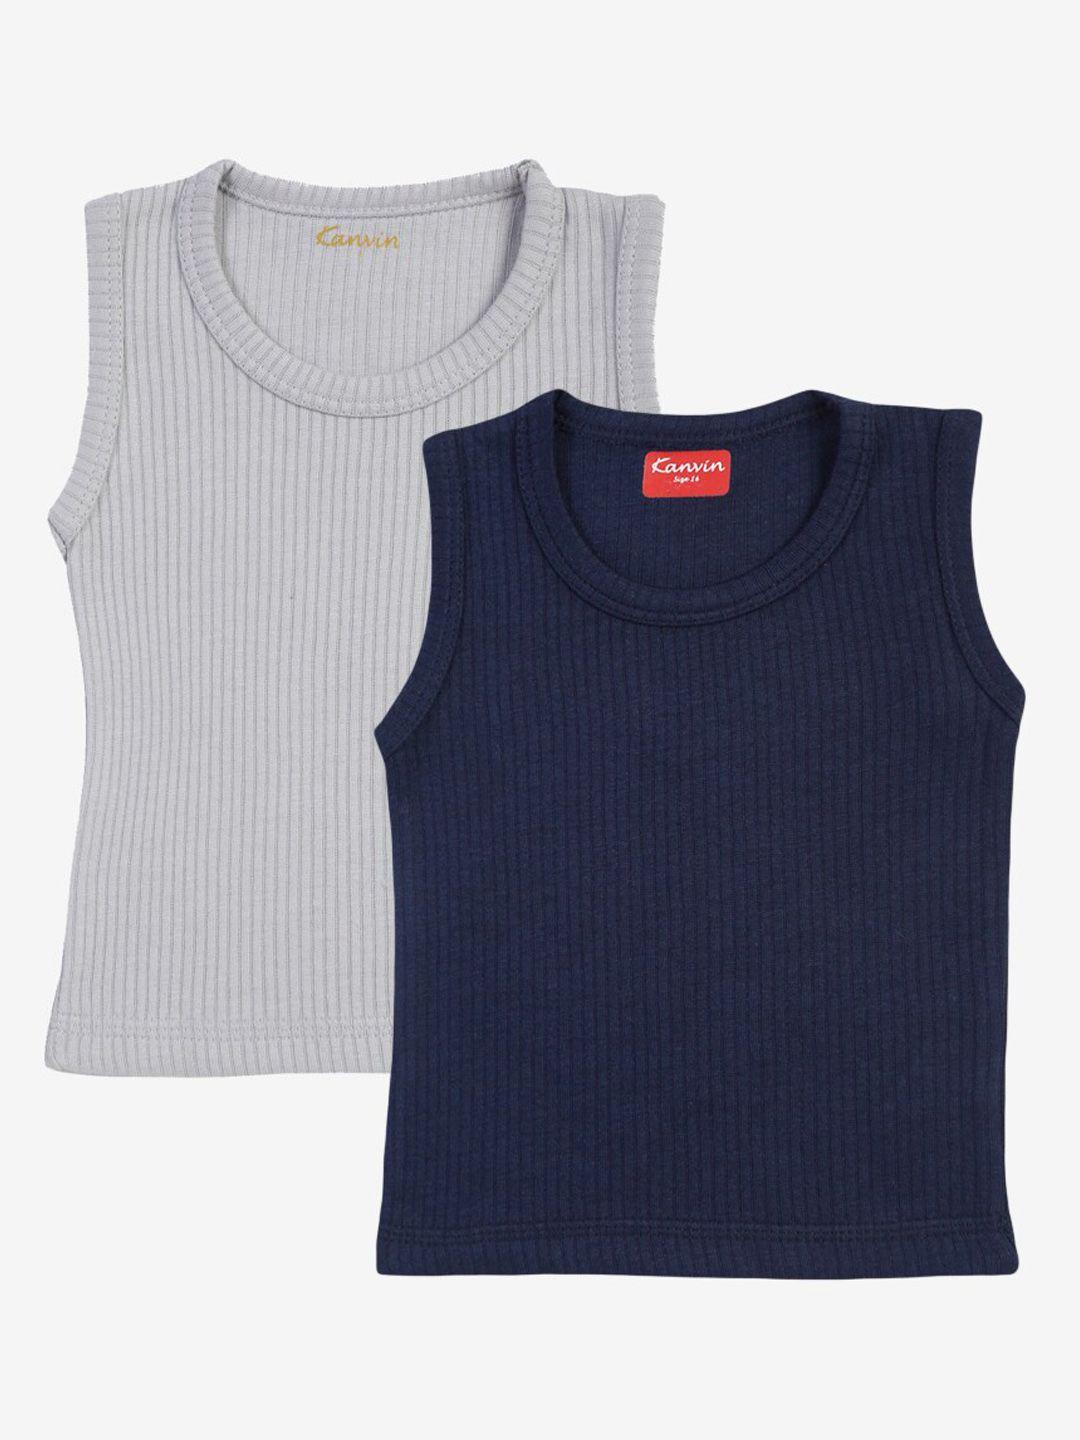 kanvin boys grey and navy blue  pack of 2 solid thermal tops